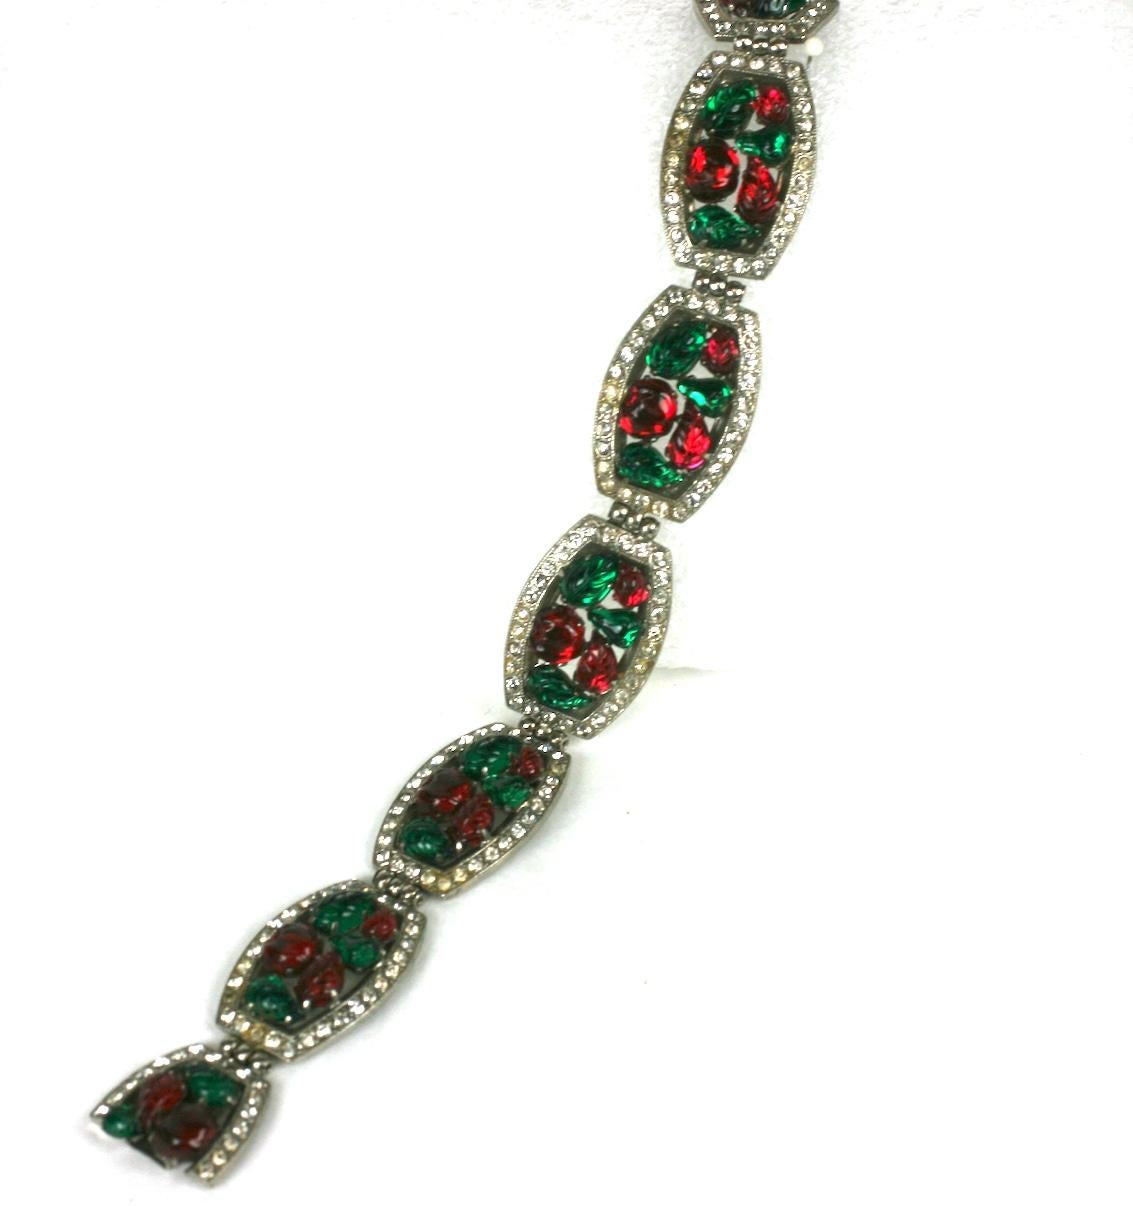 Wonderful French Art Deco Tutti Frutti style six panel link bracelet. Each oval formed link surrounded by crystal pave, the centers of prong set, hand molded faux emerald and ruby french glass fruit pointed leaves. Set in rhodium plate